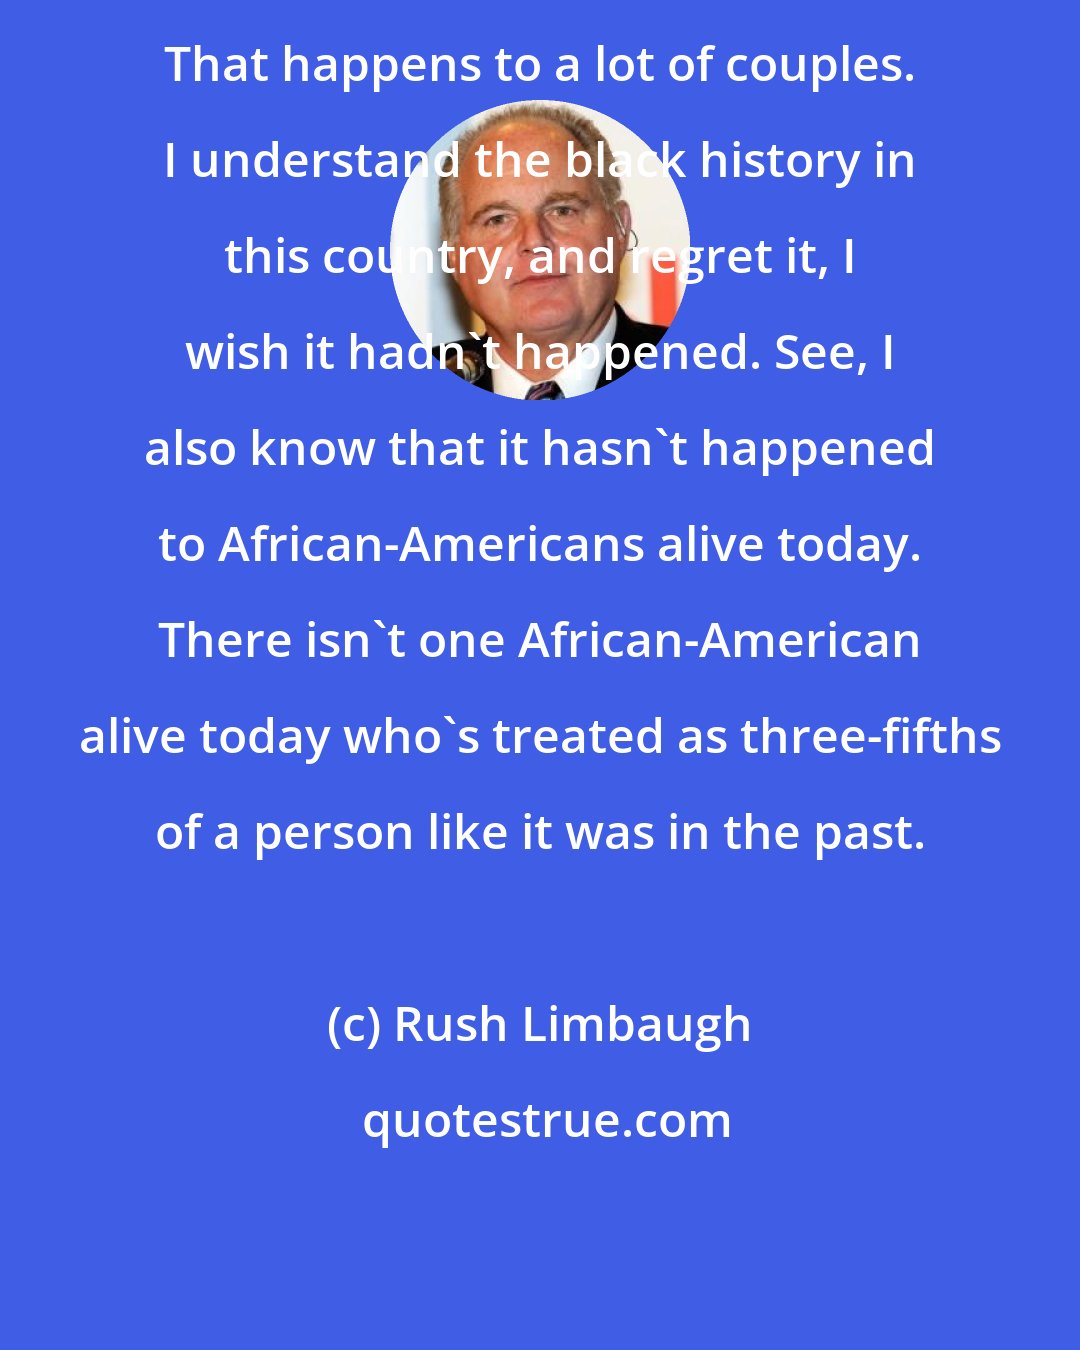 Rush Limbaugh: That happens to a lot of couples. I understand the black history in this country, and regret it, I wish it hadn't happened. See, I also know that it hasn't happened to African-Americans alive today. There isn't one African-American alive today who's treated as three-fifths of a person like it was in the past.